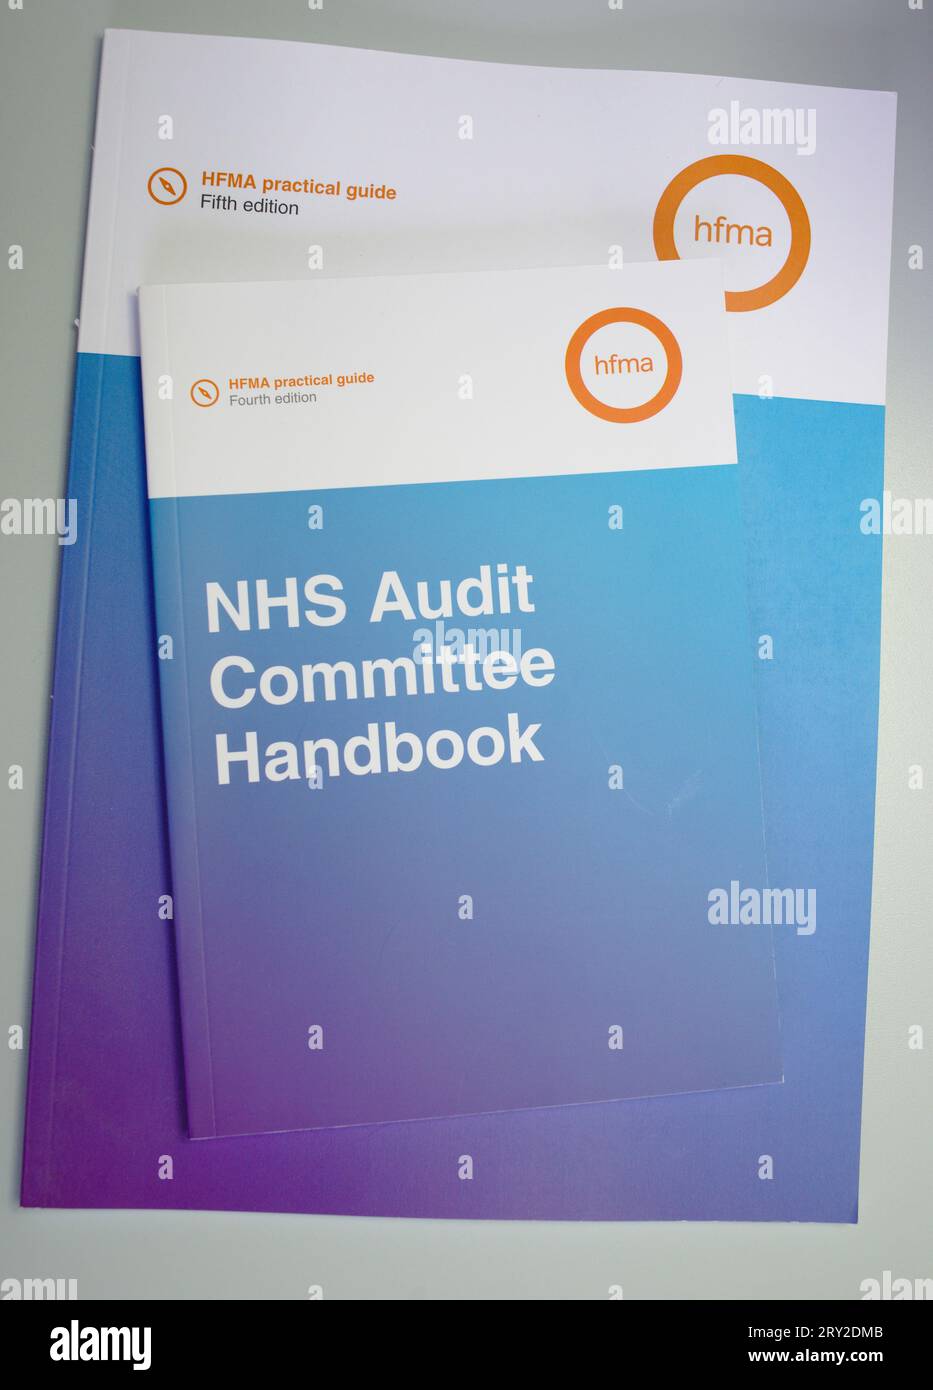 HFMA handbook on NHS audit for finance staff working in healthcare Stock Photo